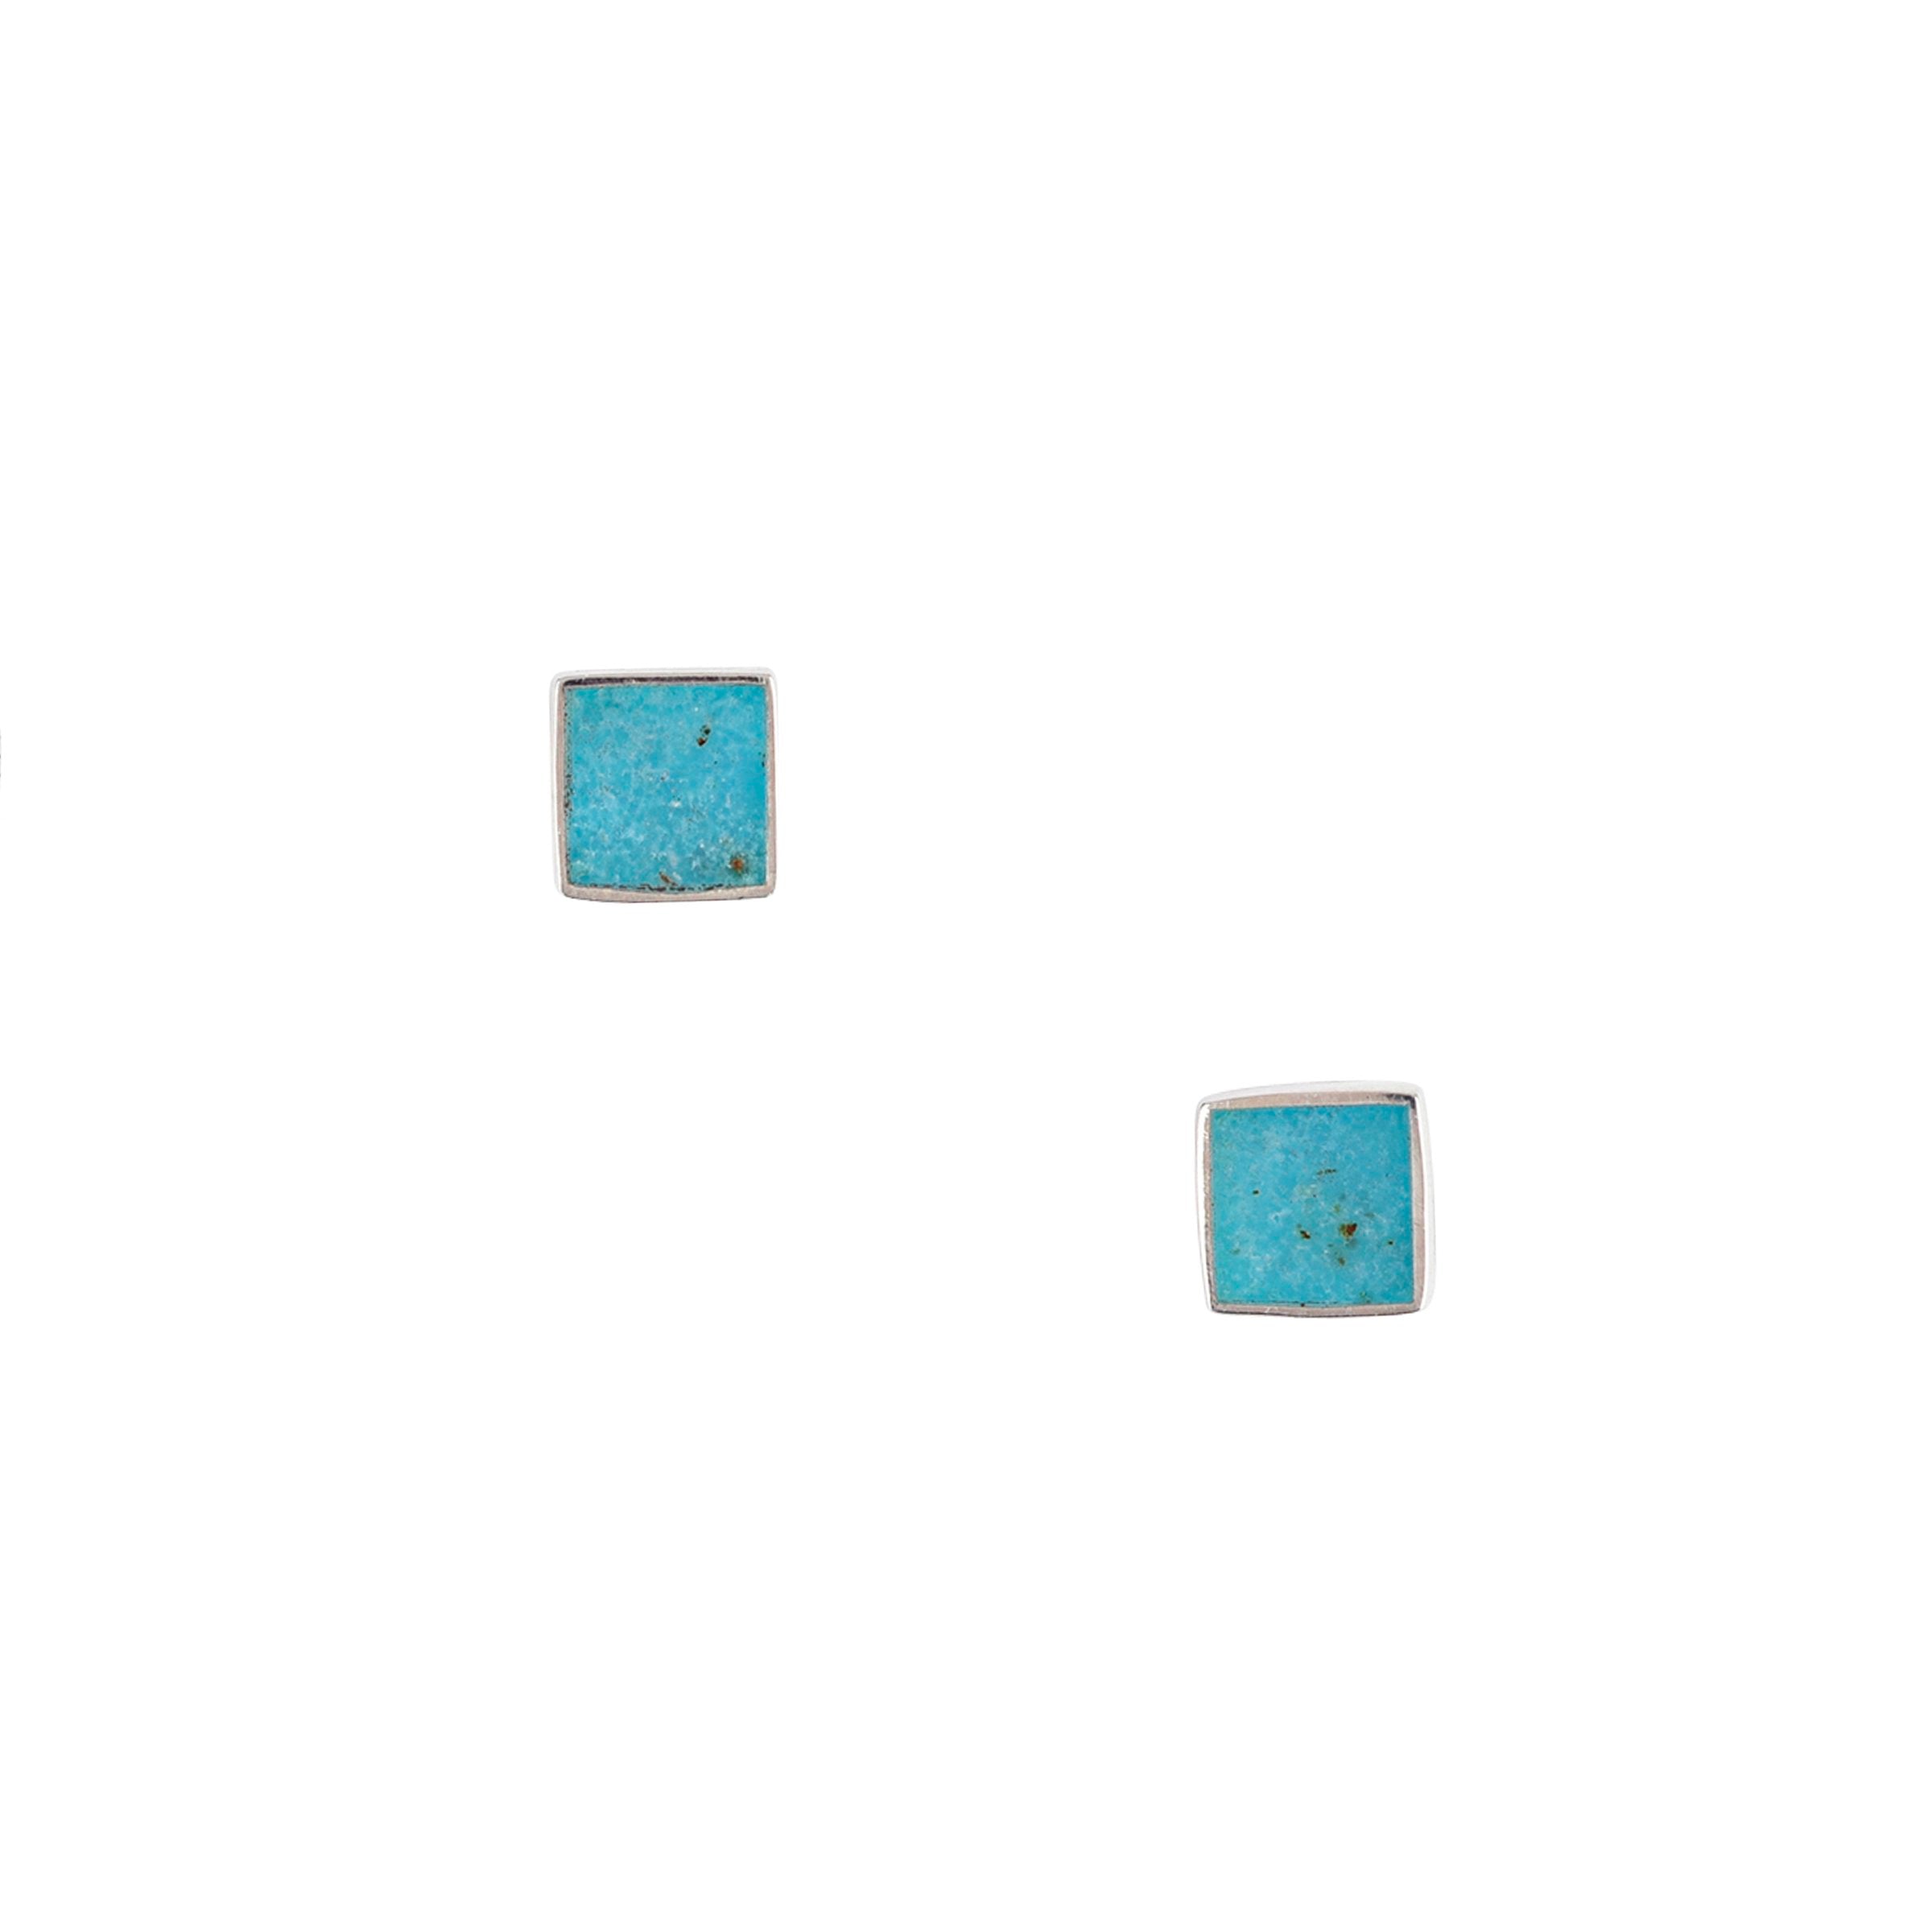 Timeless Square Earrings - Turquoise